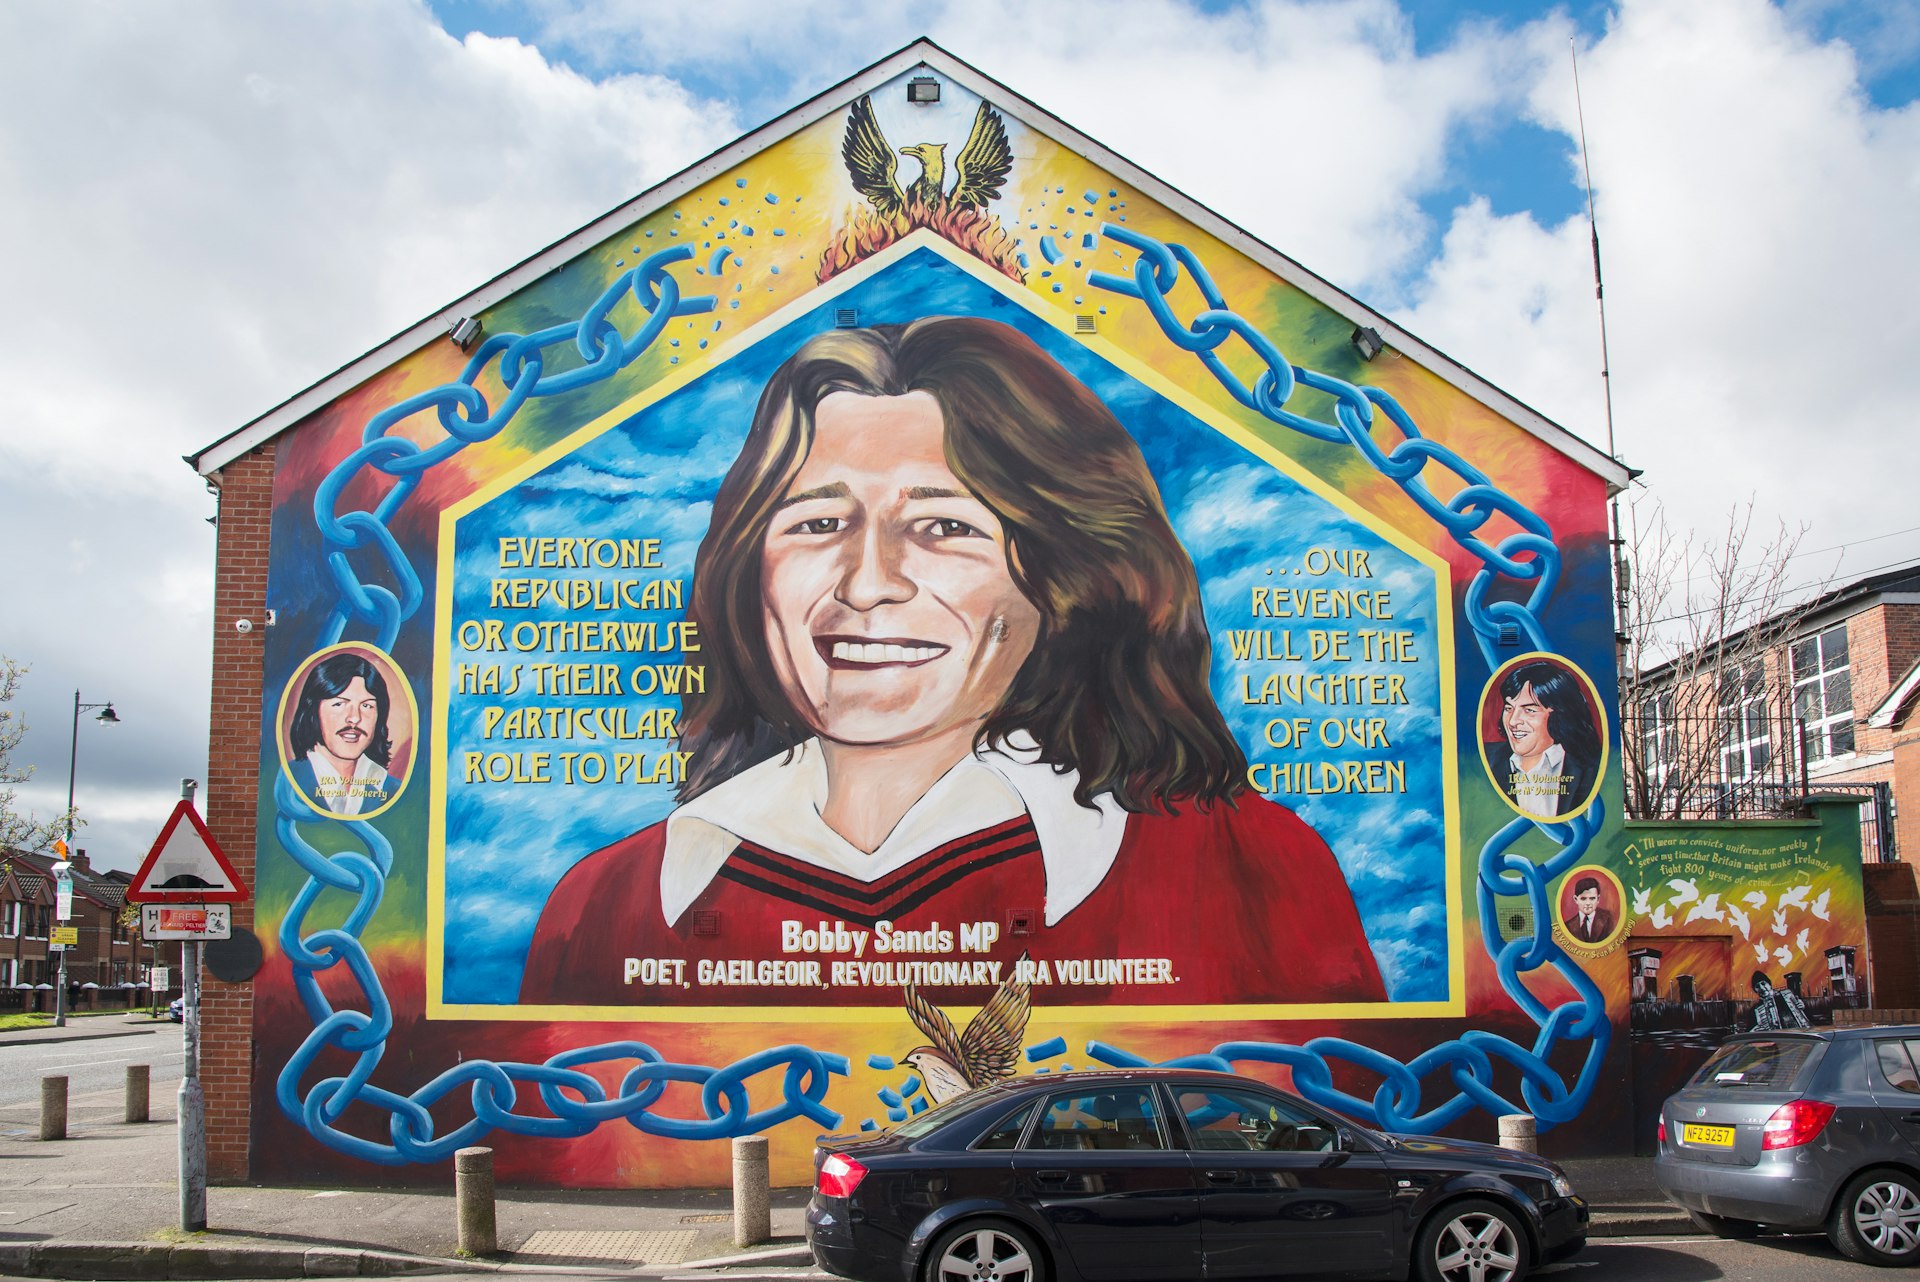 Republican Mural featuring Bobby Sands on the Falls Road in Belfast